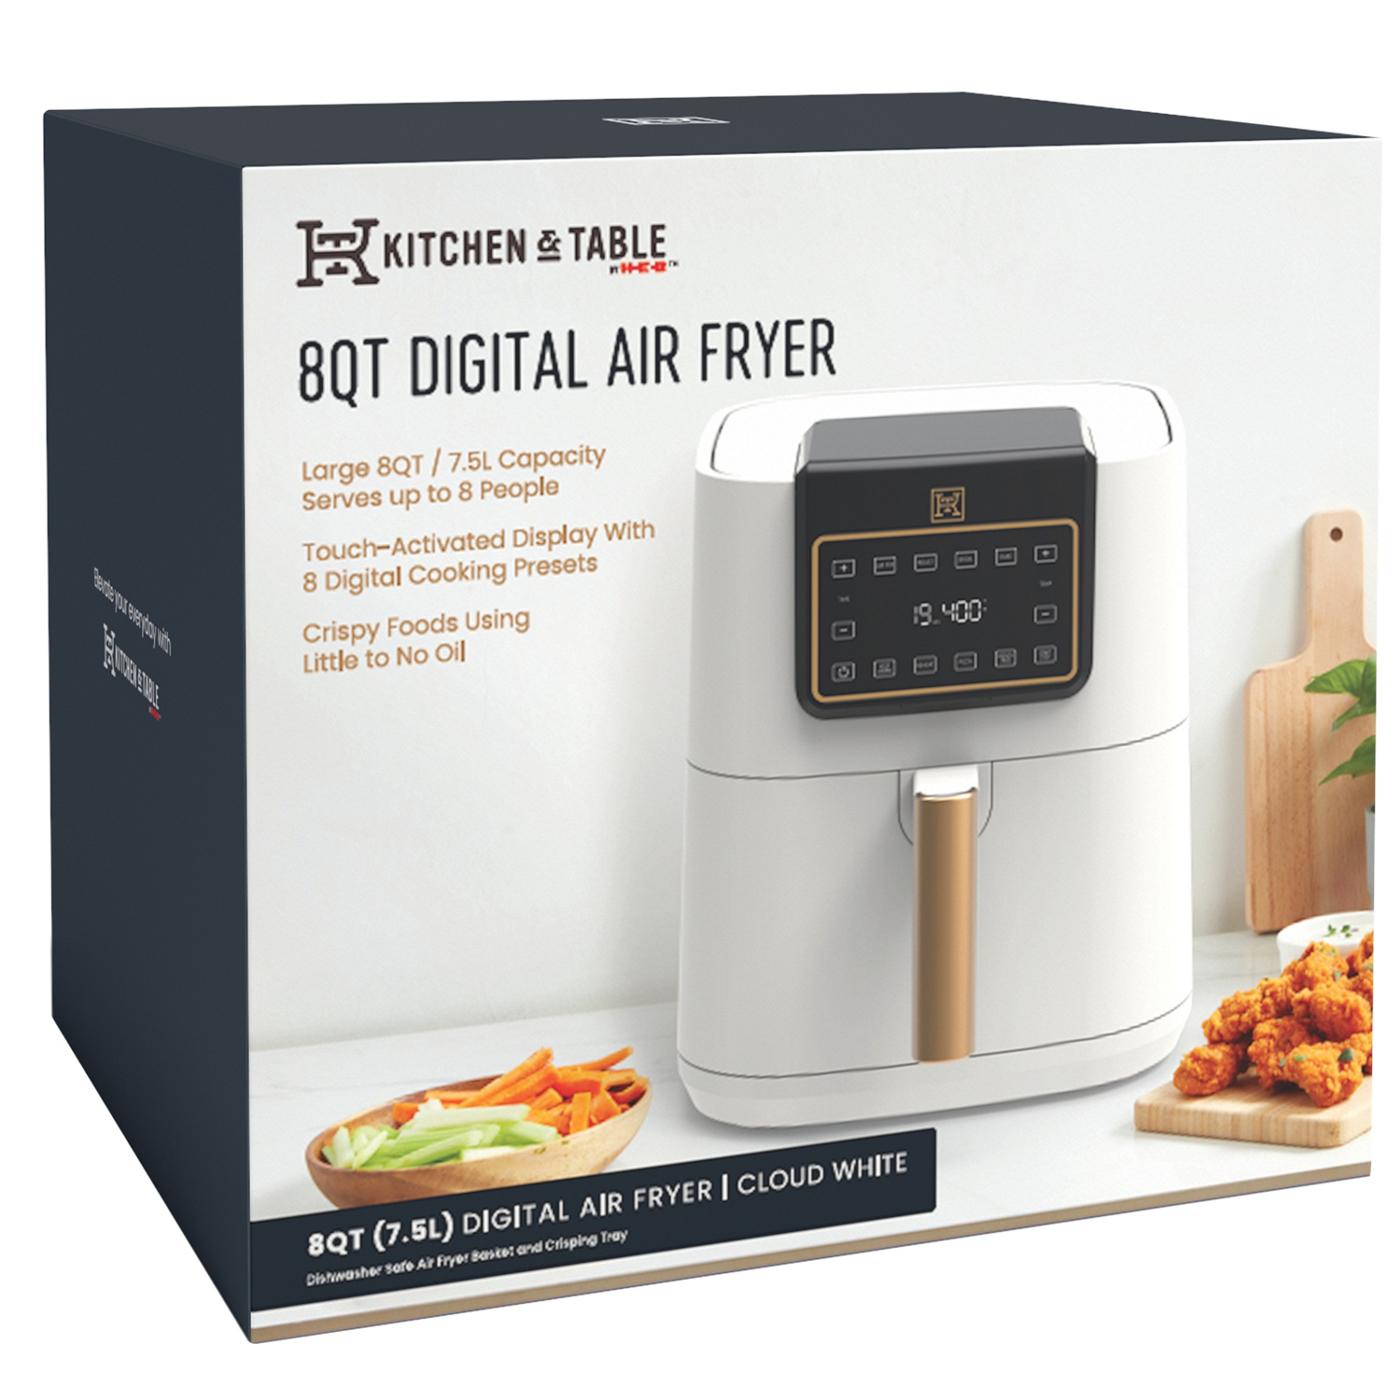 vedholdende plade millimeter Kitchen & Table by H-E-B Digital Air Fryer - Cloud White - Shop Cookers &  Roasters at H-E-B